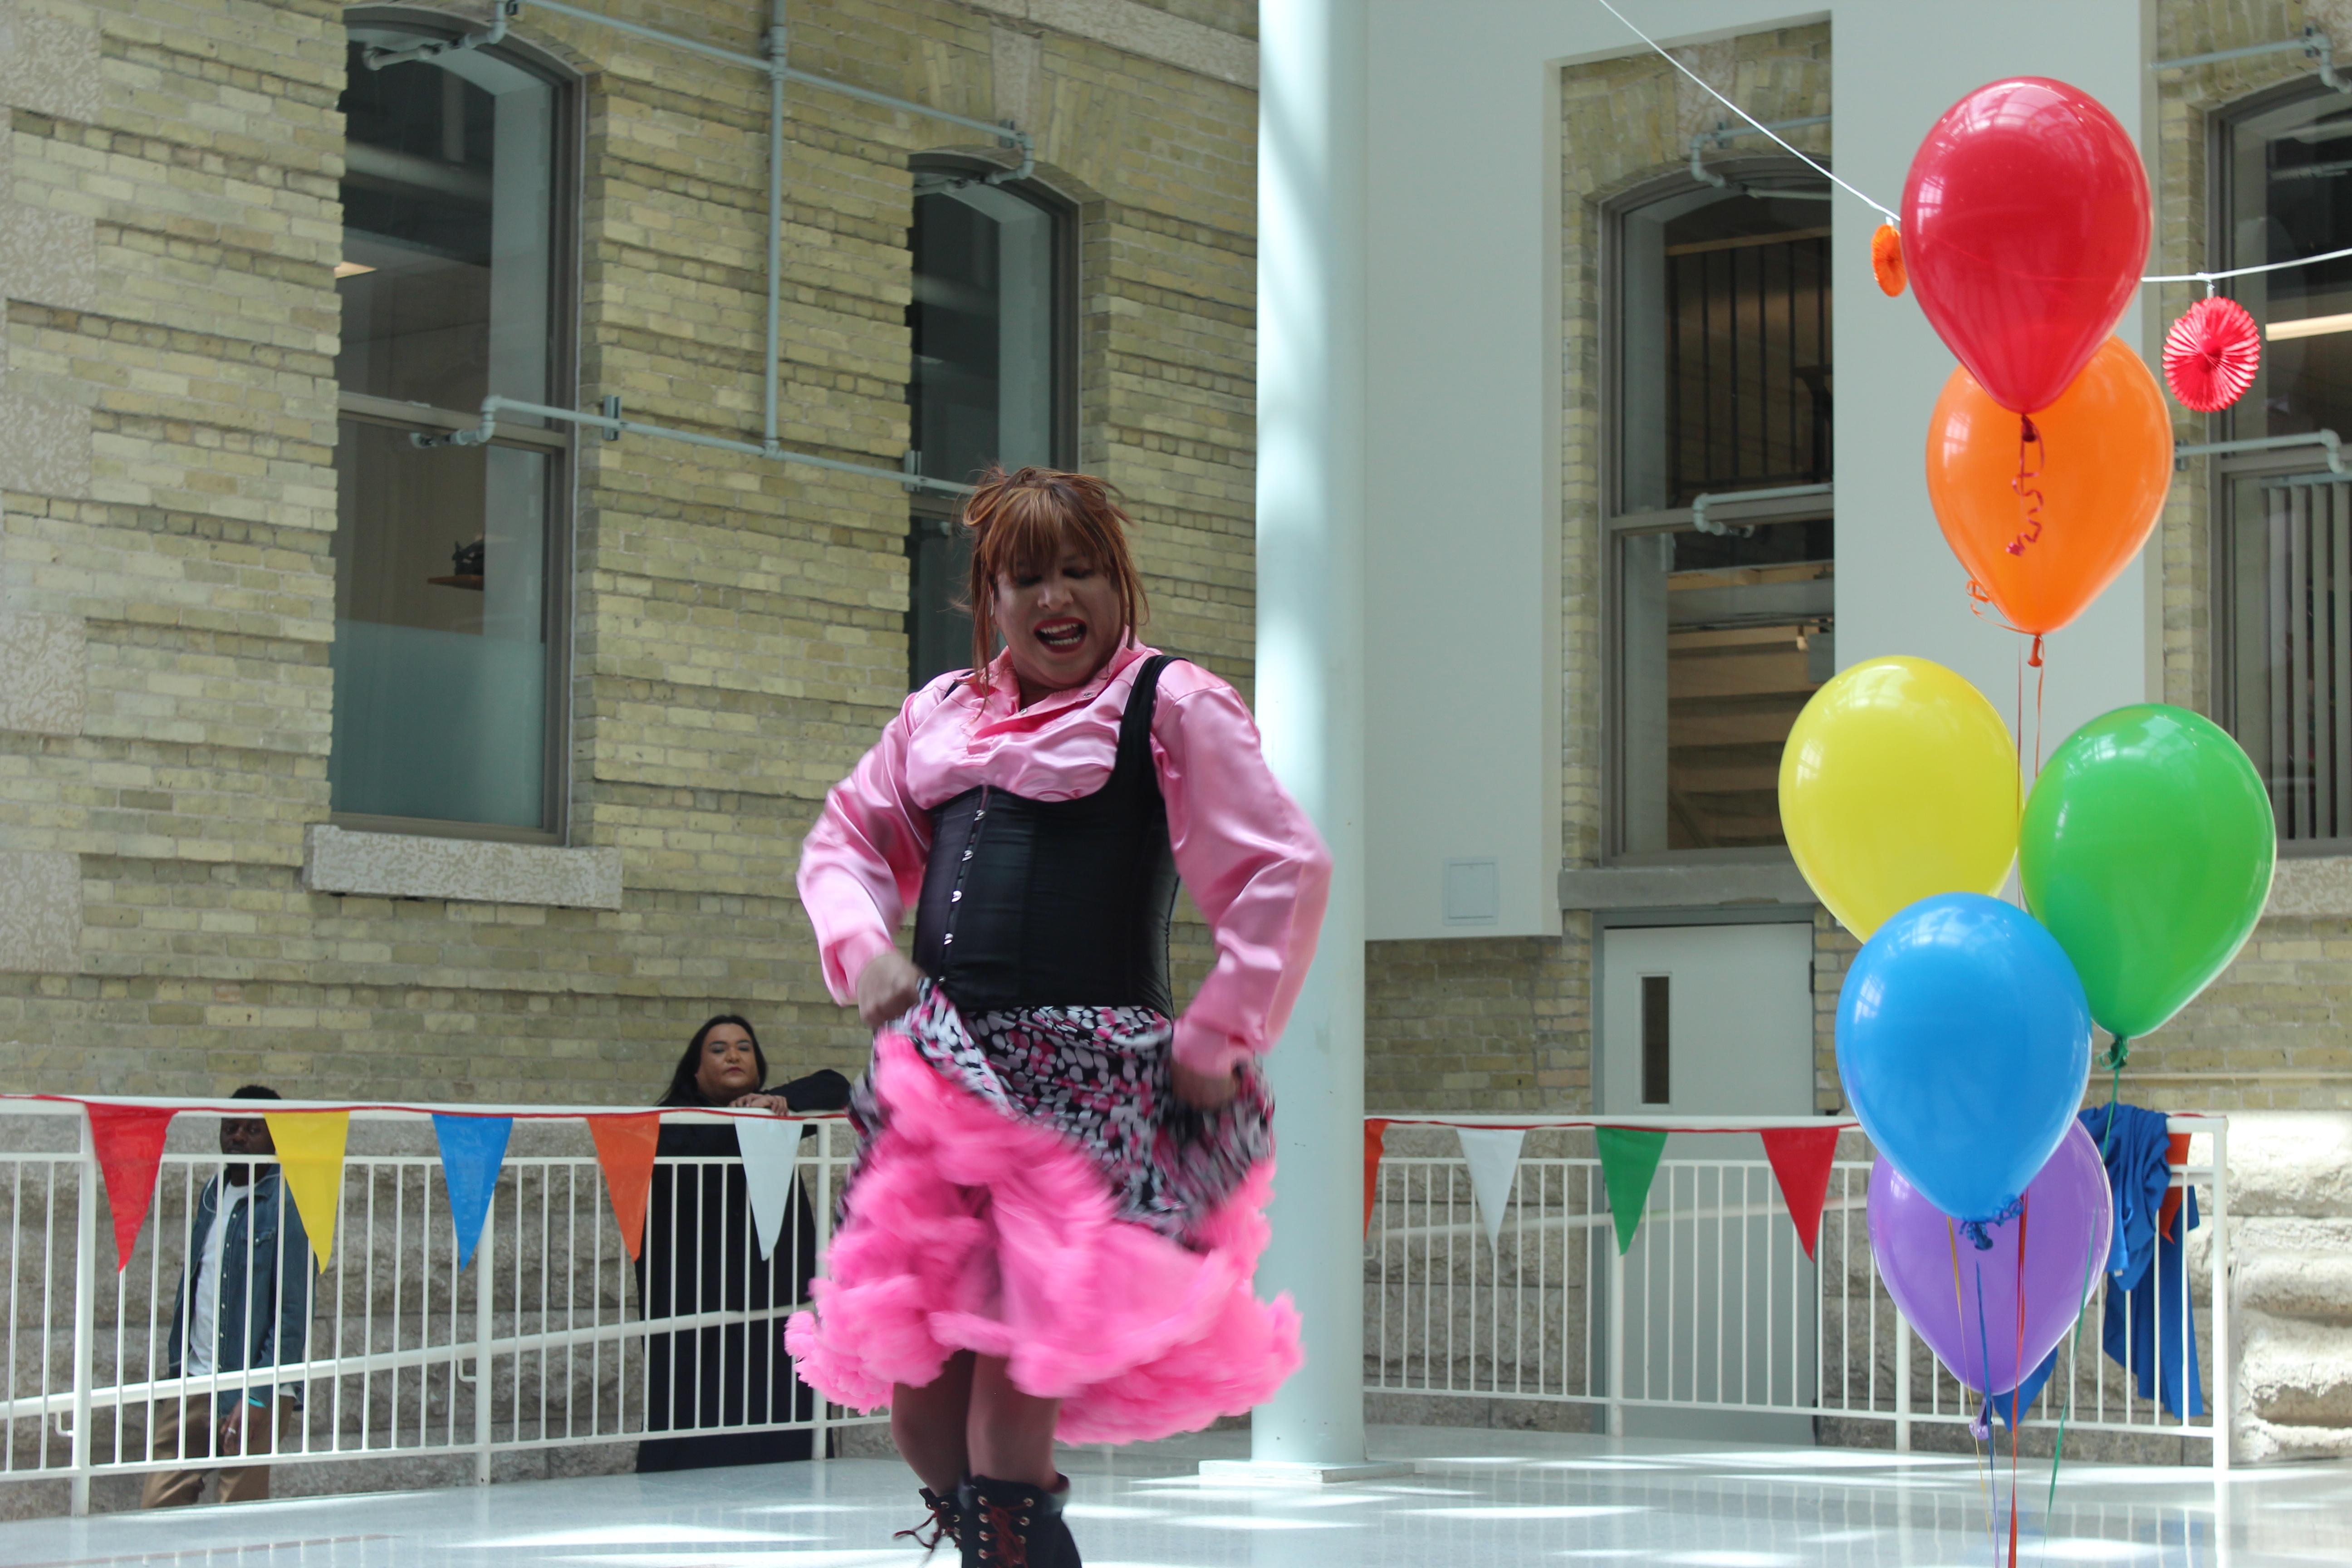 A performer at the U of M drag show on May 19.